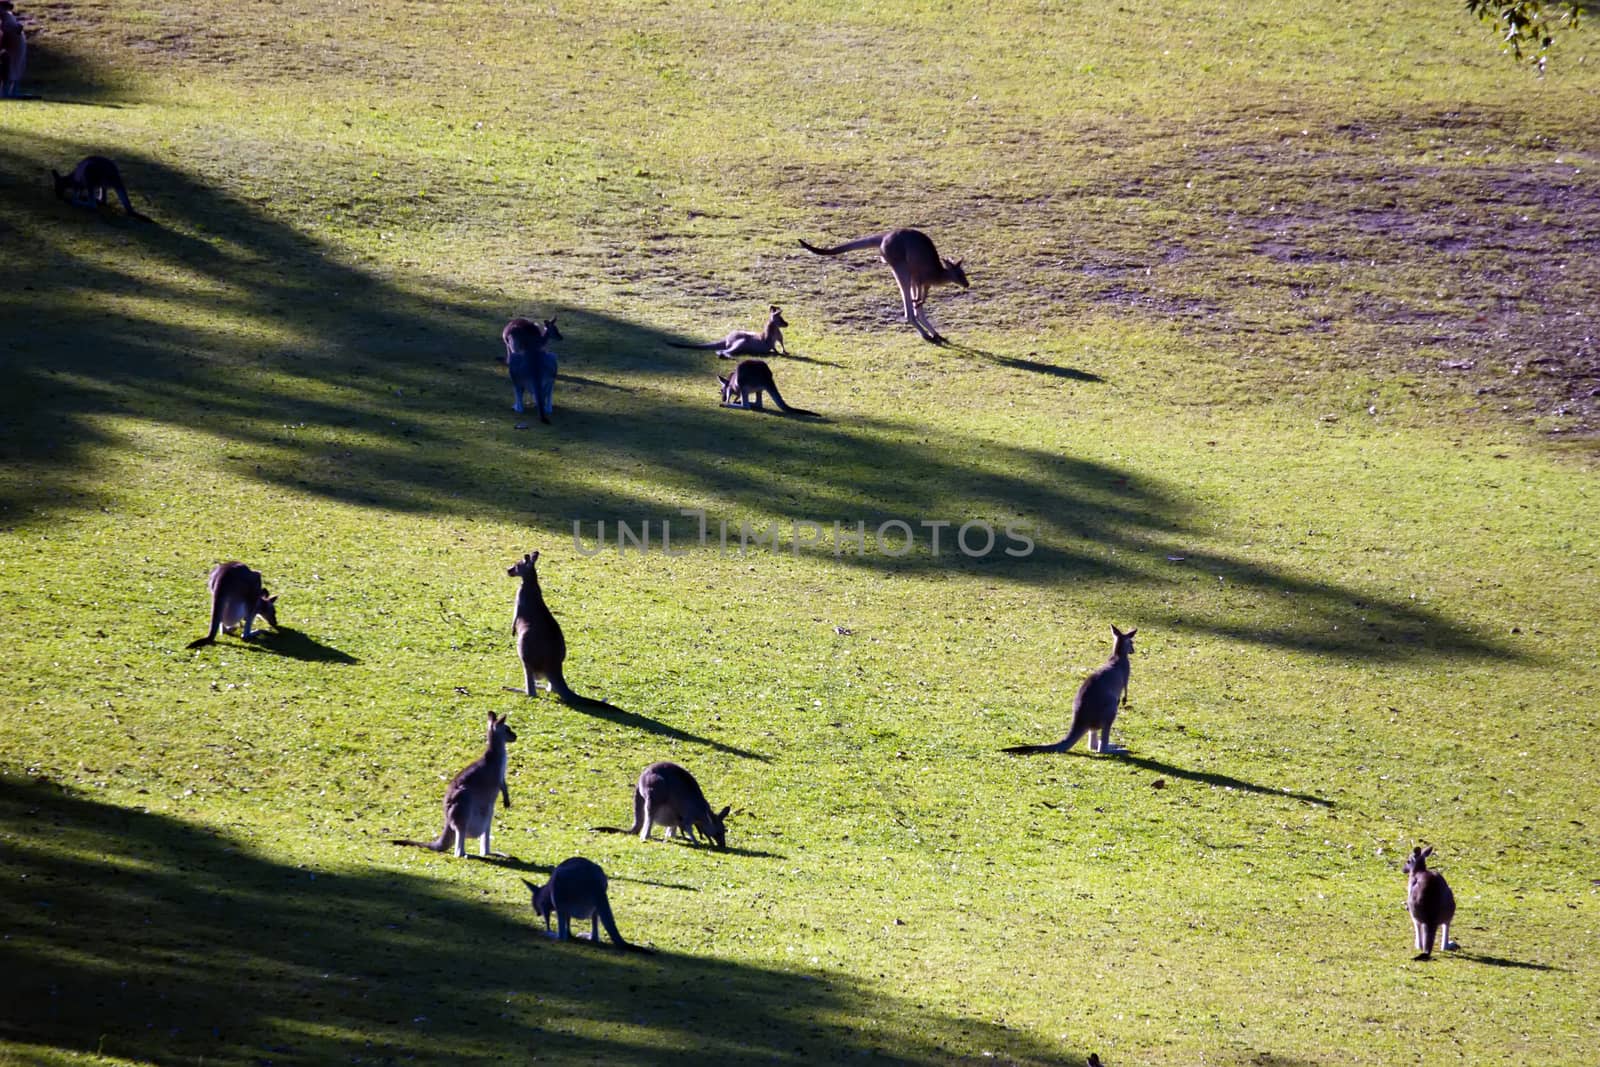 Group of kangaroos enjoying a sunny valley by definitearts